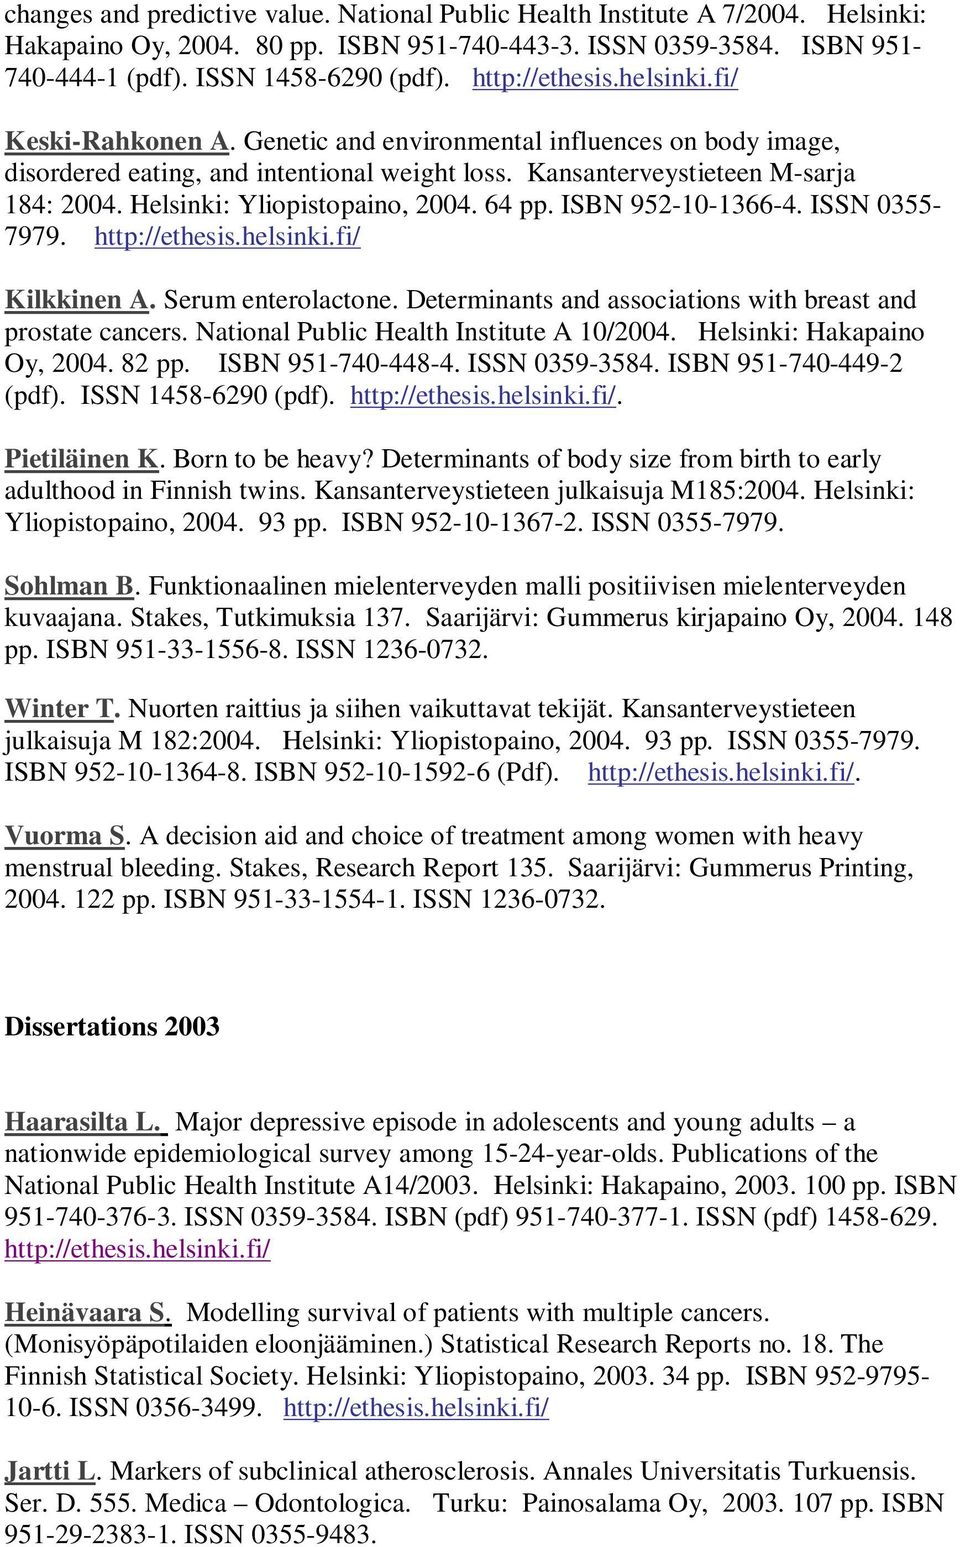 ISBN 952-10-1366-4. ISSN 0355-7979. Kilkkinen A. Serum enterolactone. Determinants and associations with breast and prostate cancers. National Public Health Institute A 10/2004.